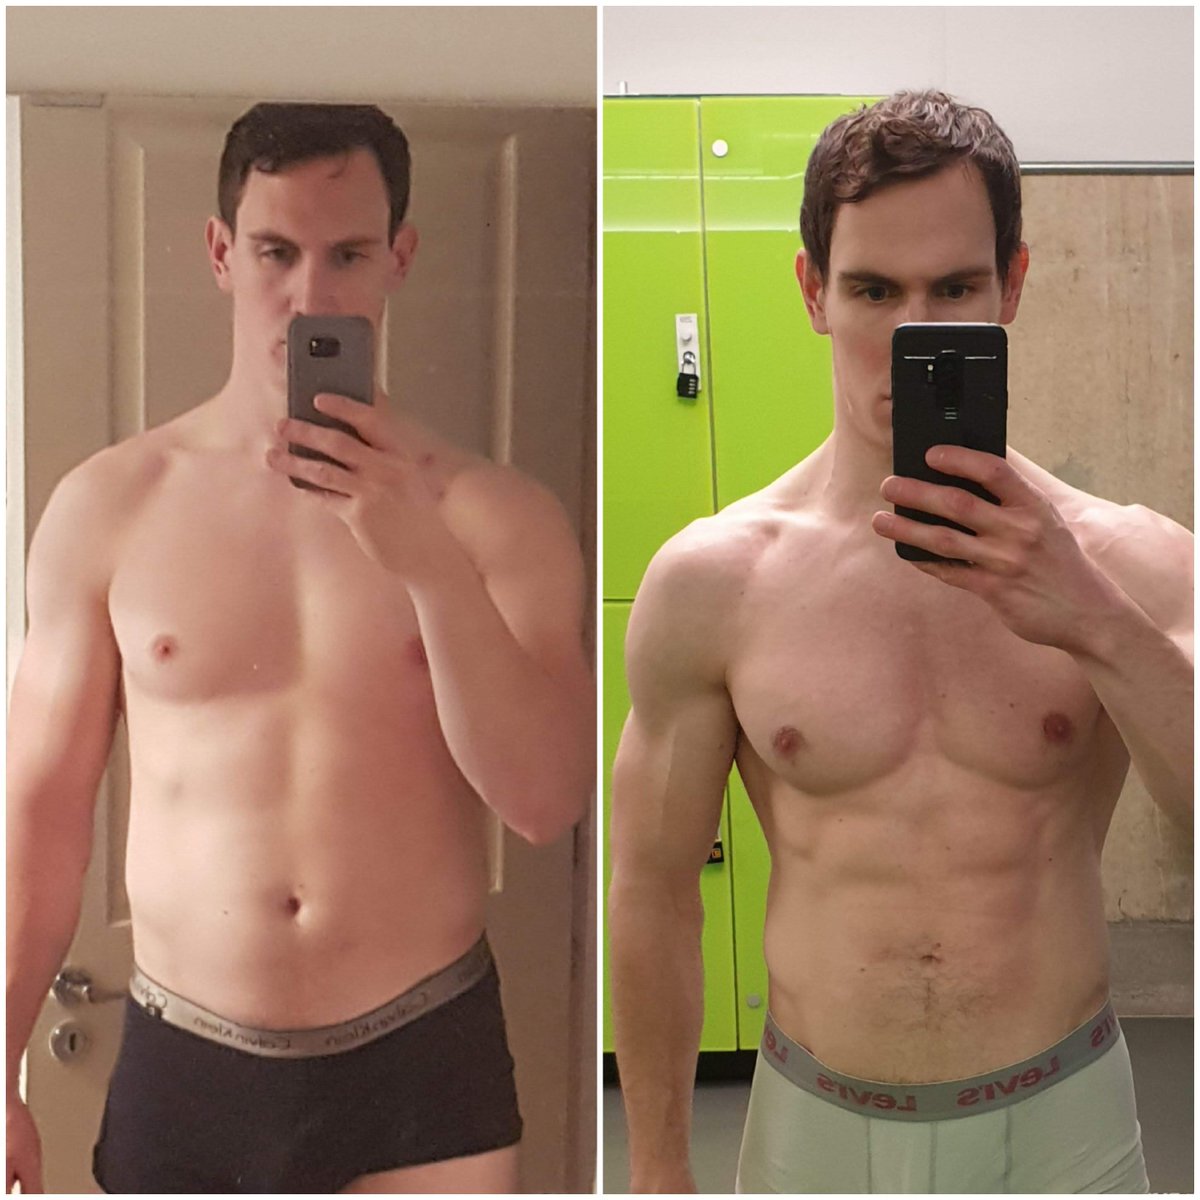 Yes, there are awesome 12 week transformations (or faster) - but if you see someone looking jacked/ripped in a few months or less, then they ALREADY had muscle and they just lost fat covering it. There can be a dramatic visible difference. It's unlikely they started from scratch.